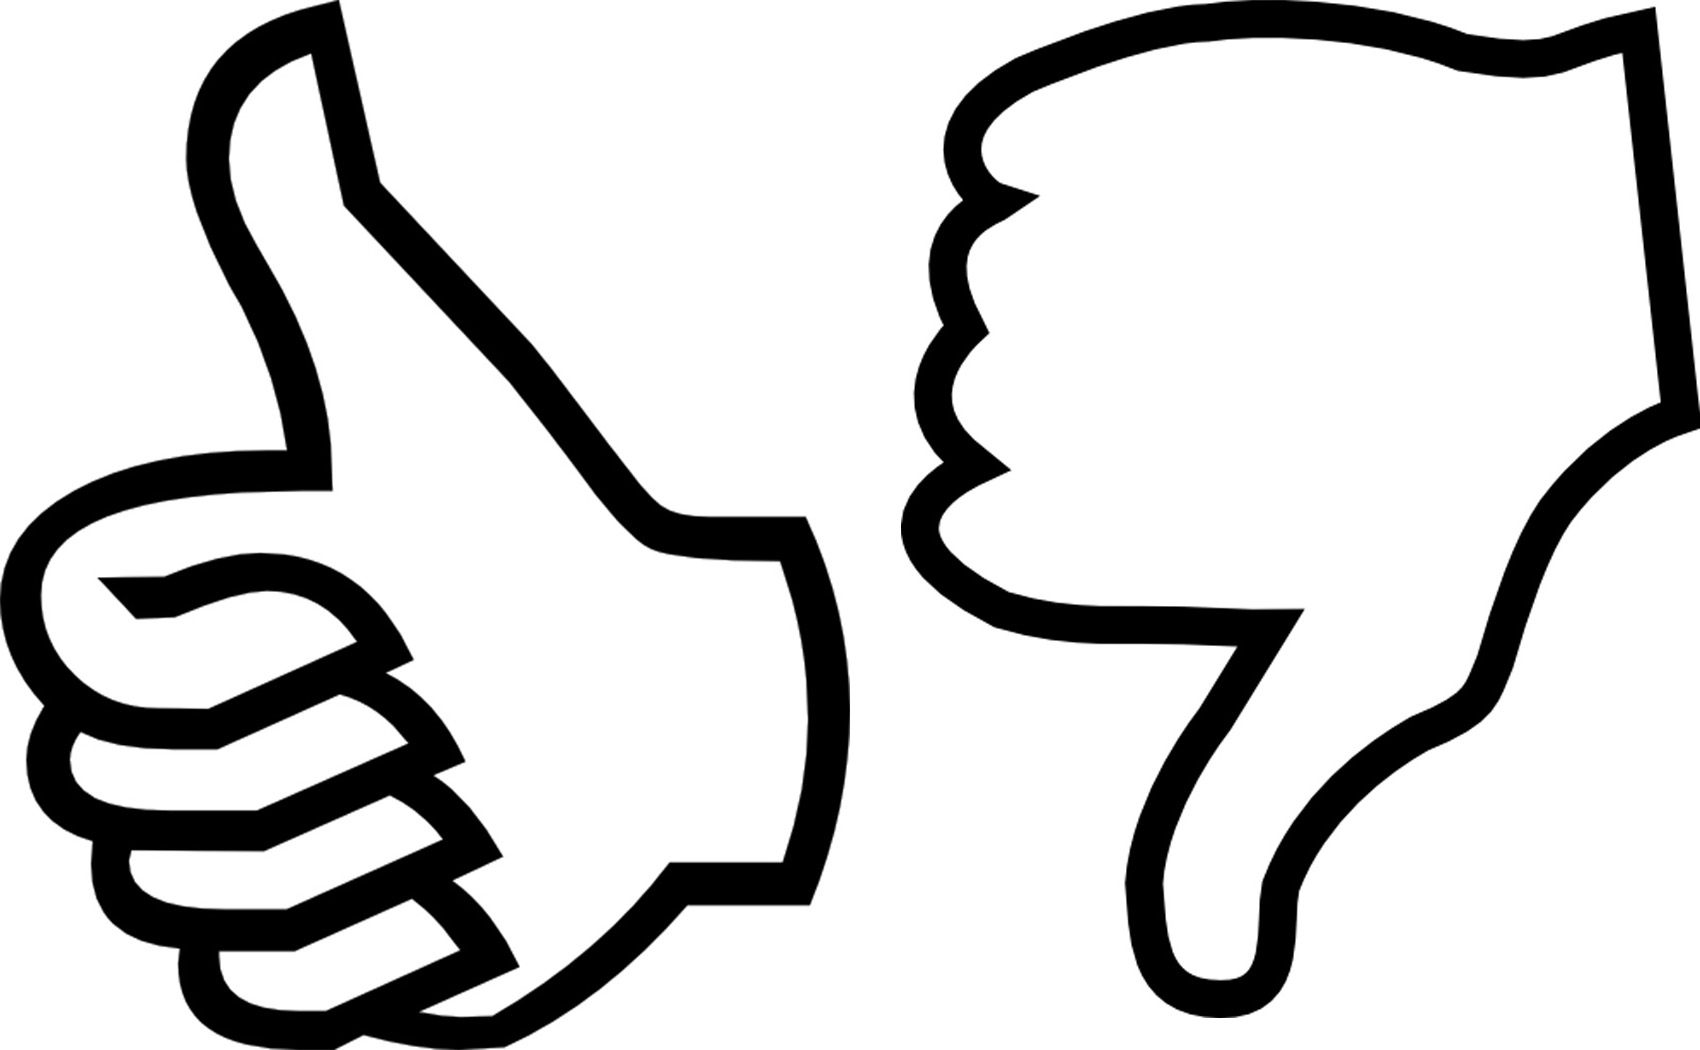 thumbs up and thumbs down drawing - Clip Art Library